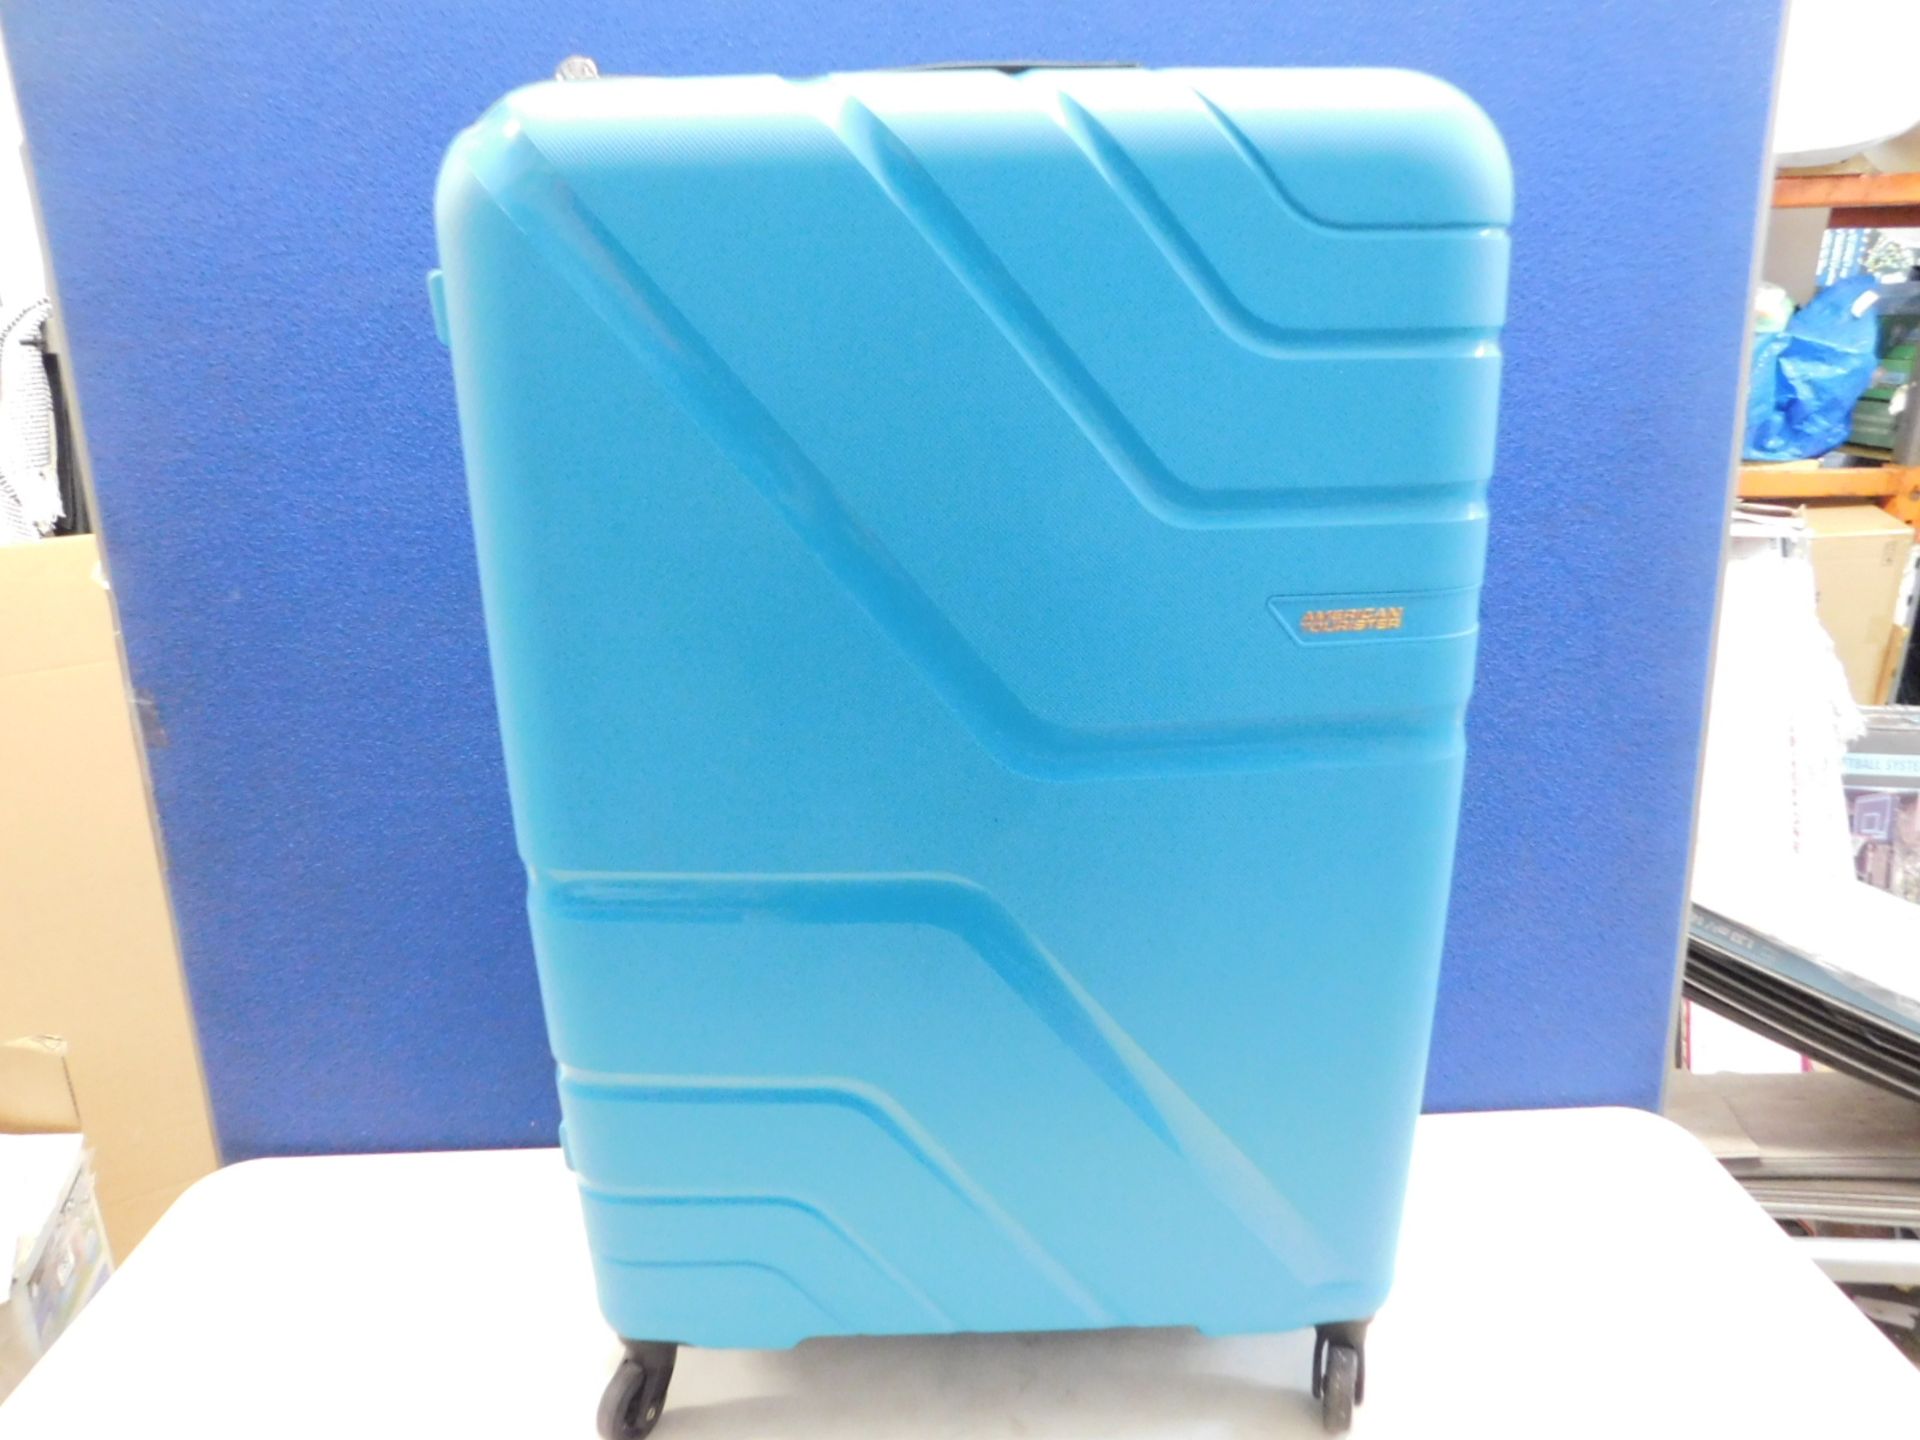 1 AMERICAN TOURISTER LIGHT BLUE HARDSIDE PROTECTION LARGE LUGGAGE RRP Â£59